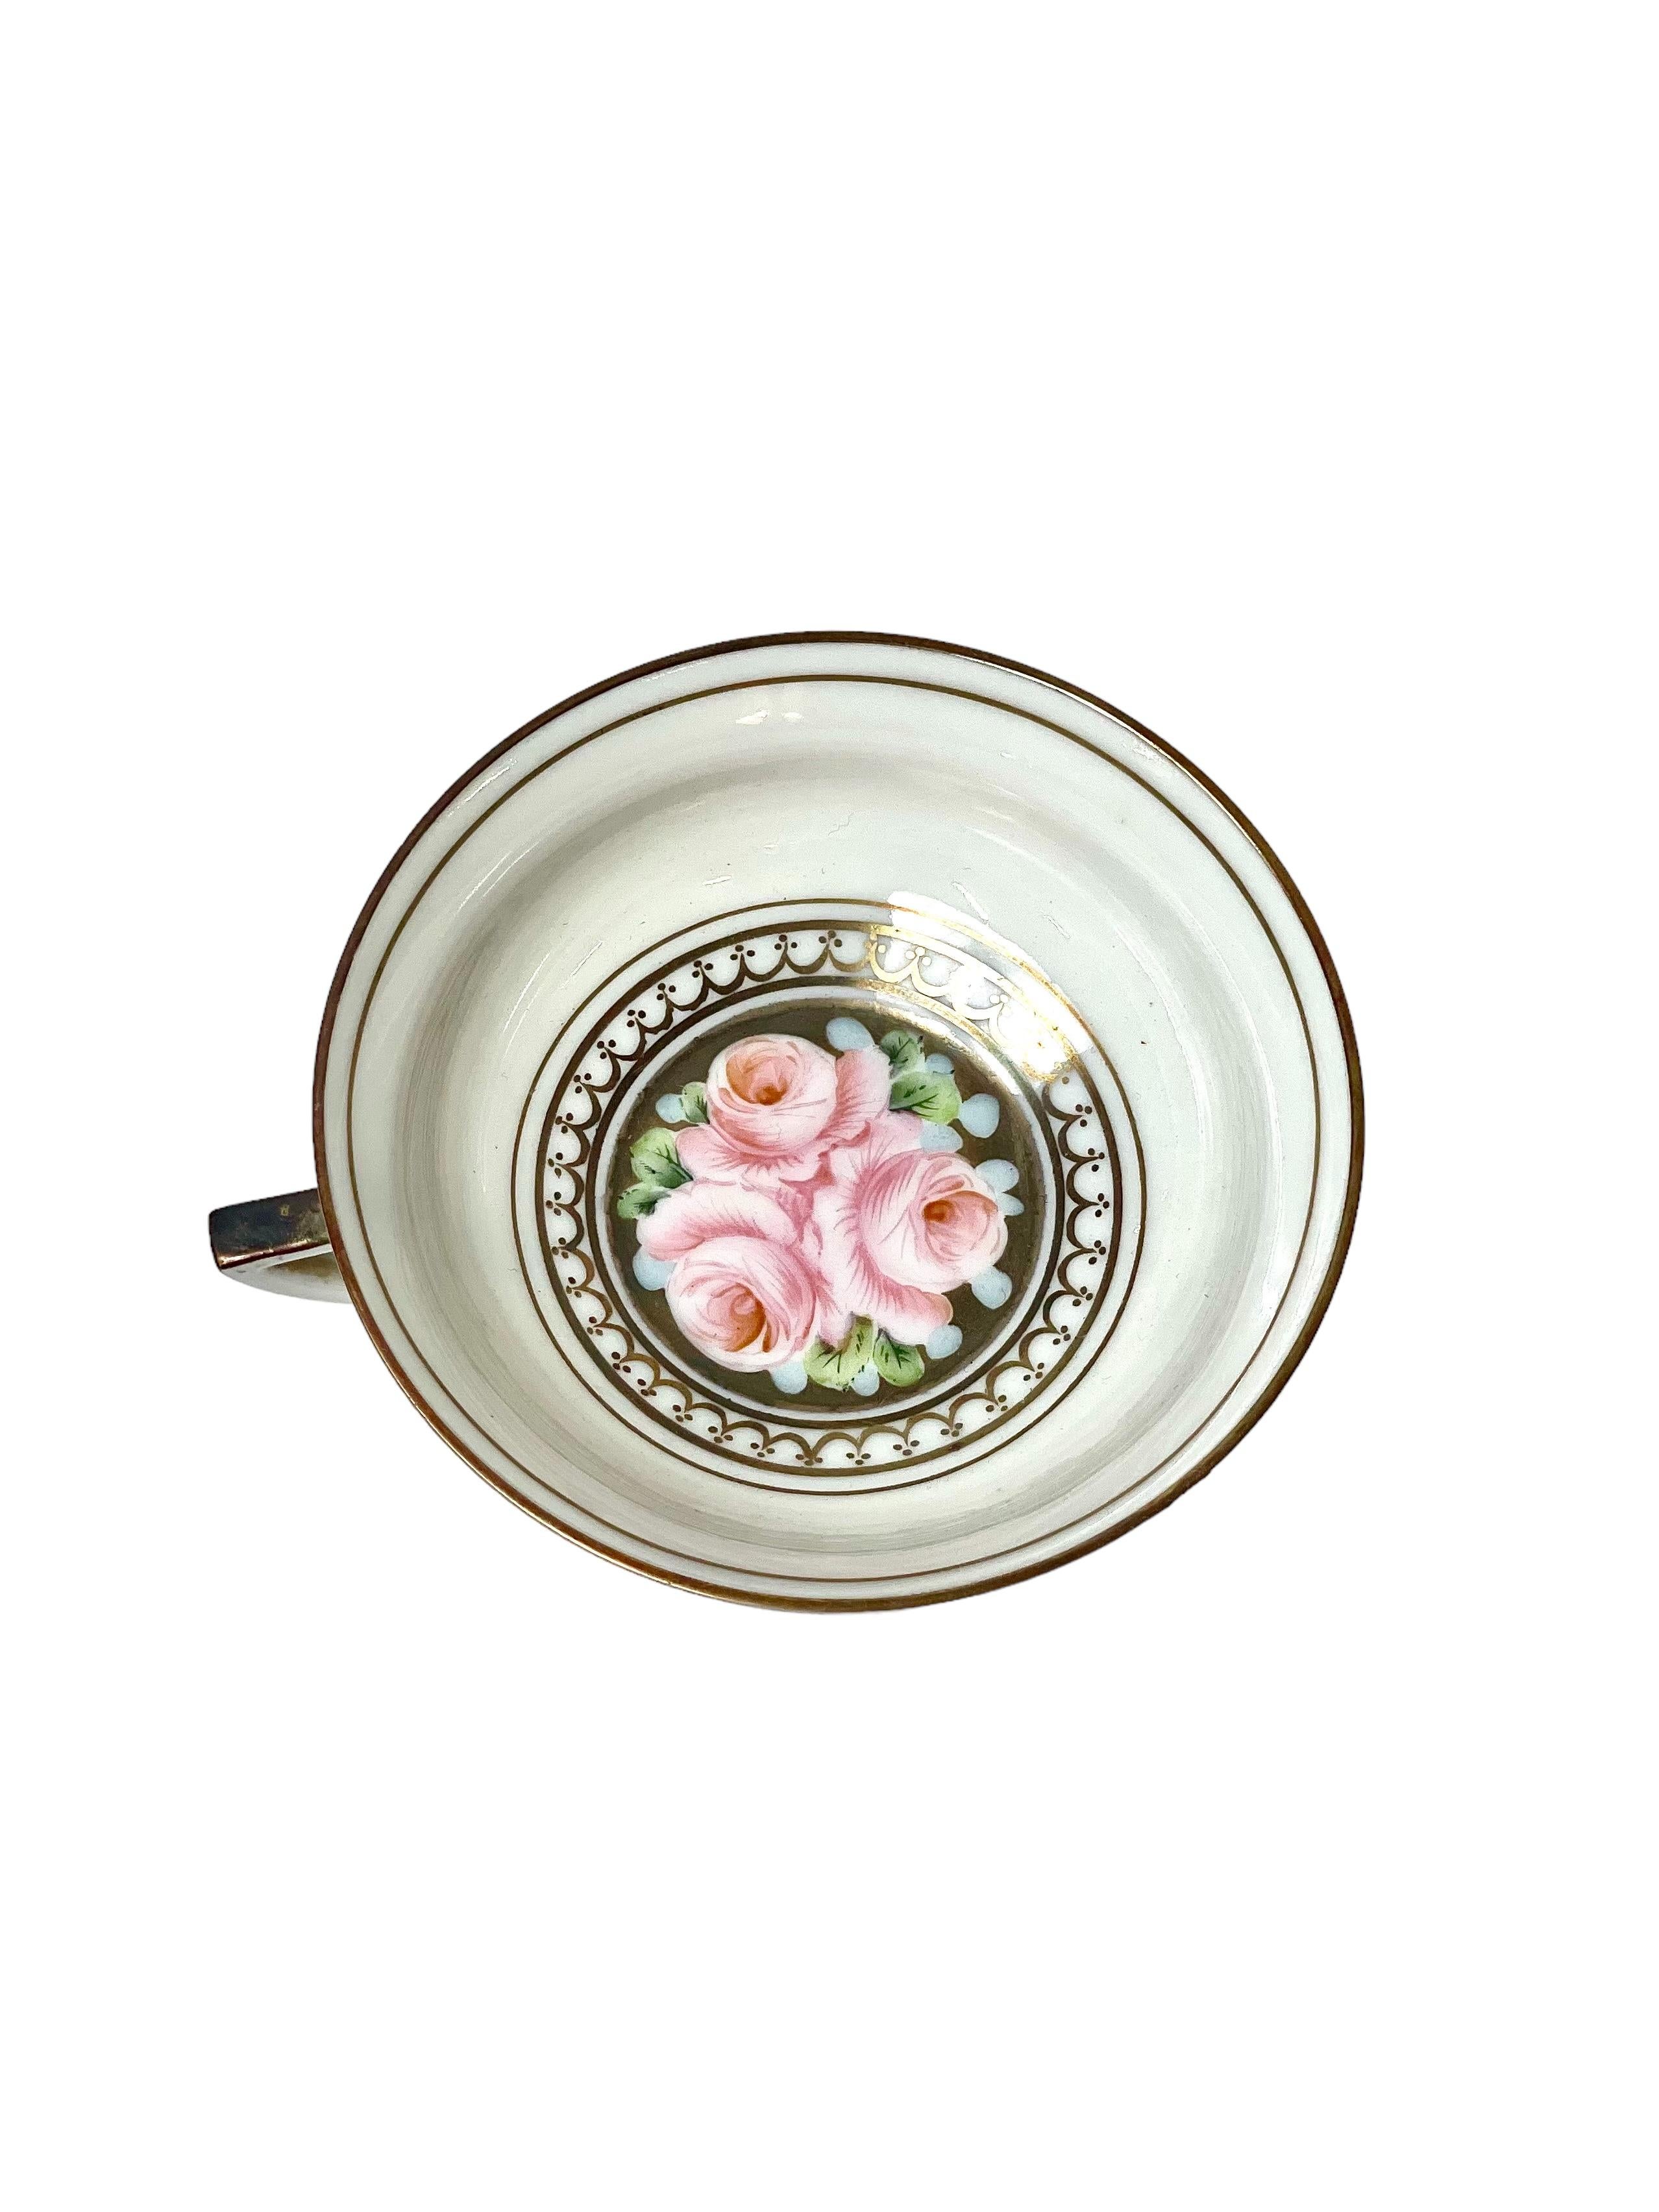 French Vintage Empire Style Porcelain Coffee Service with a decor of Flowers For Sale 7